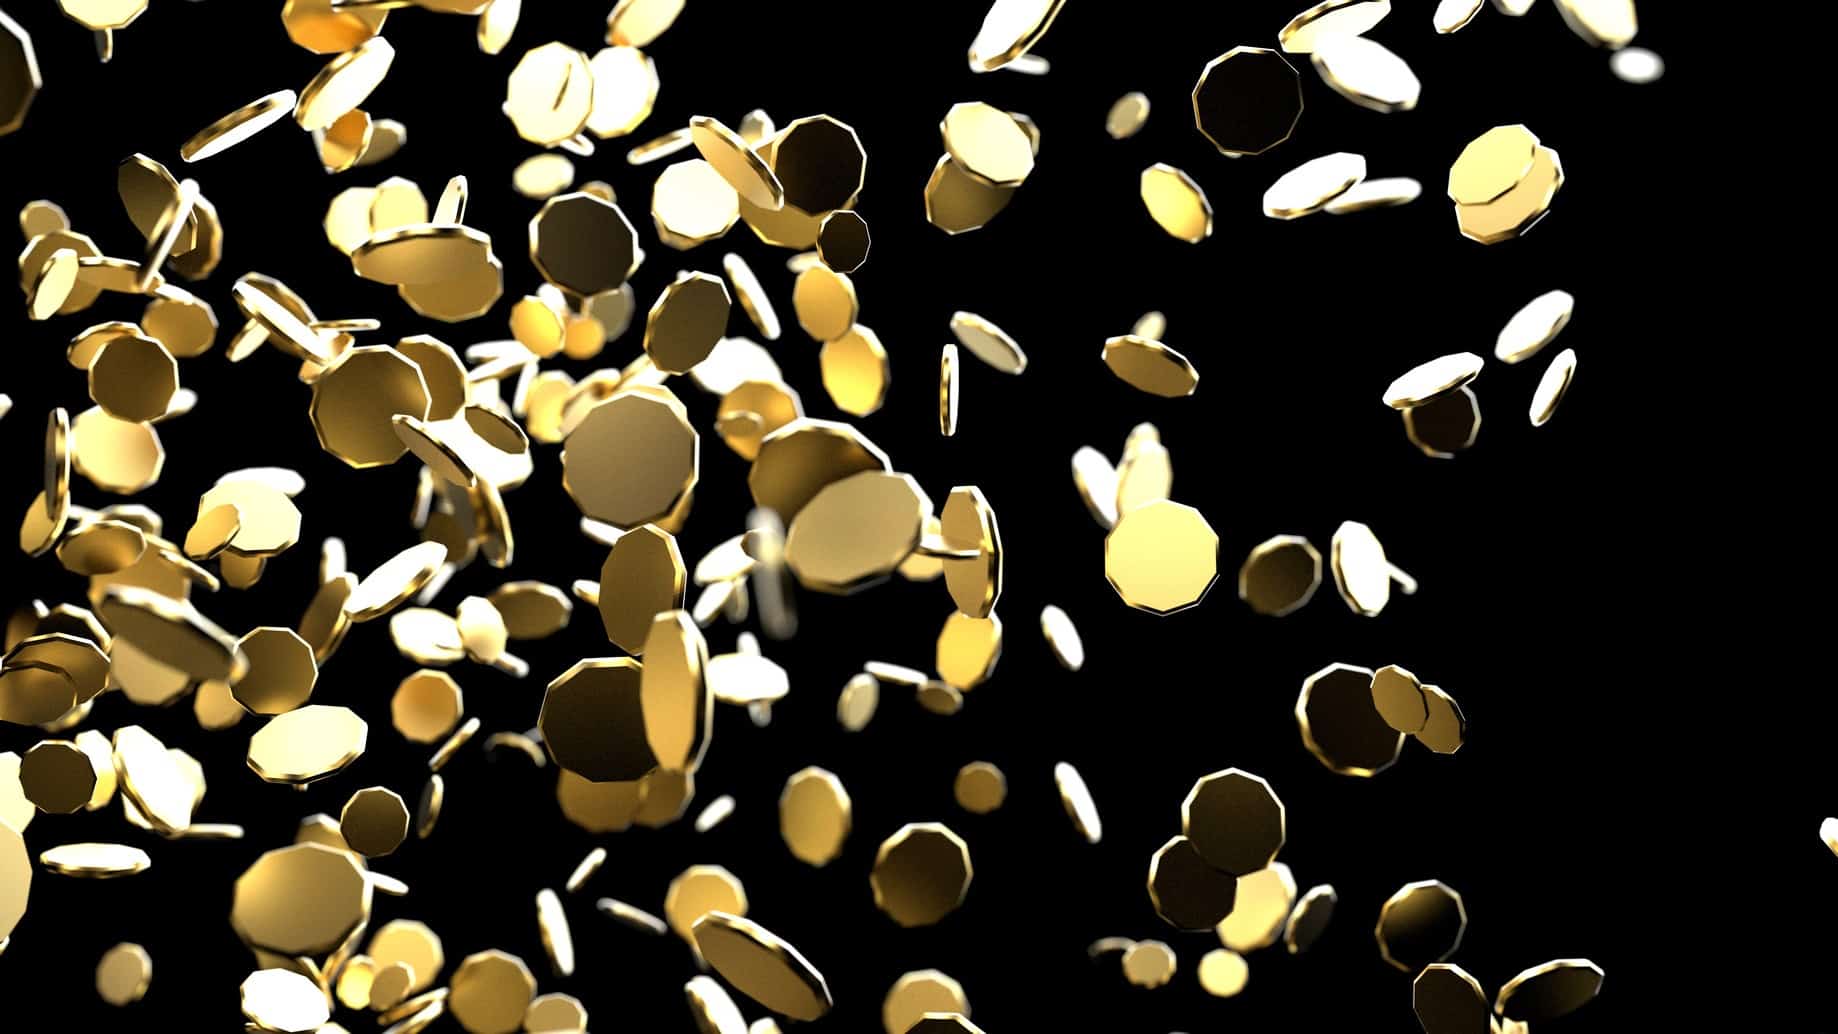 Abstract gold polygonal coins on black background